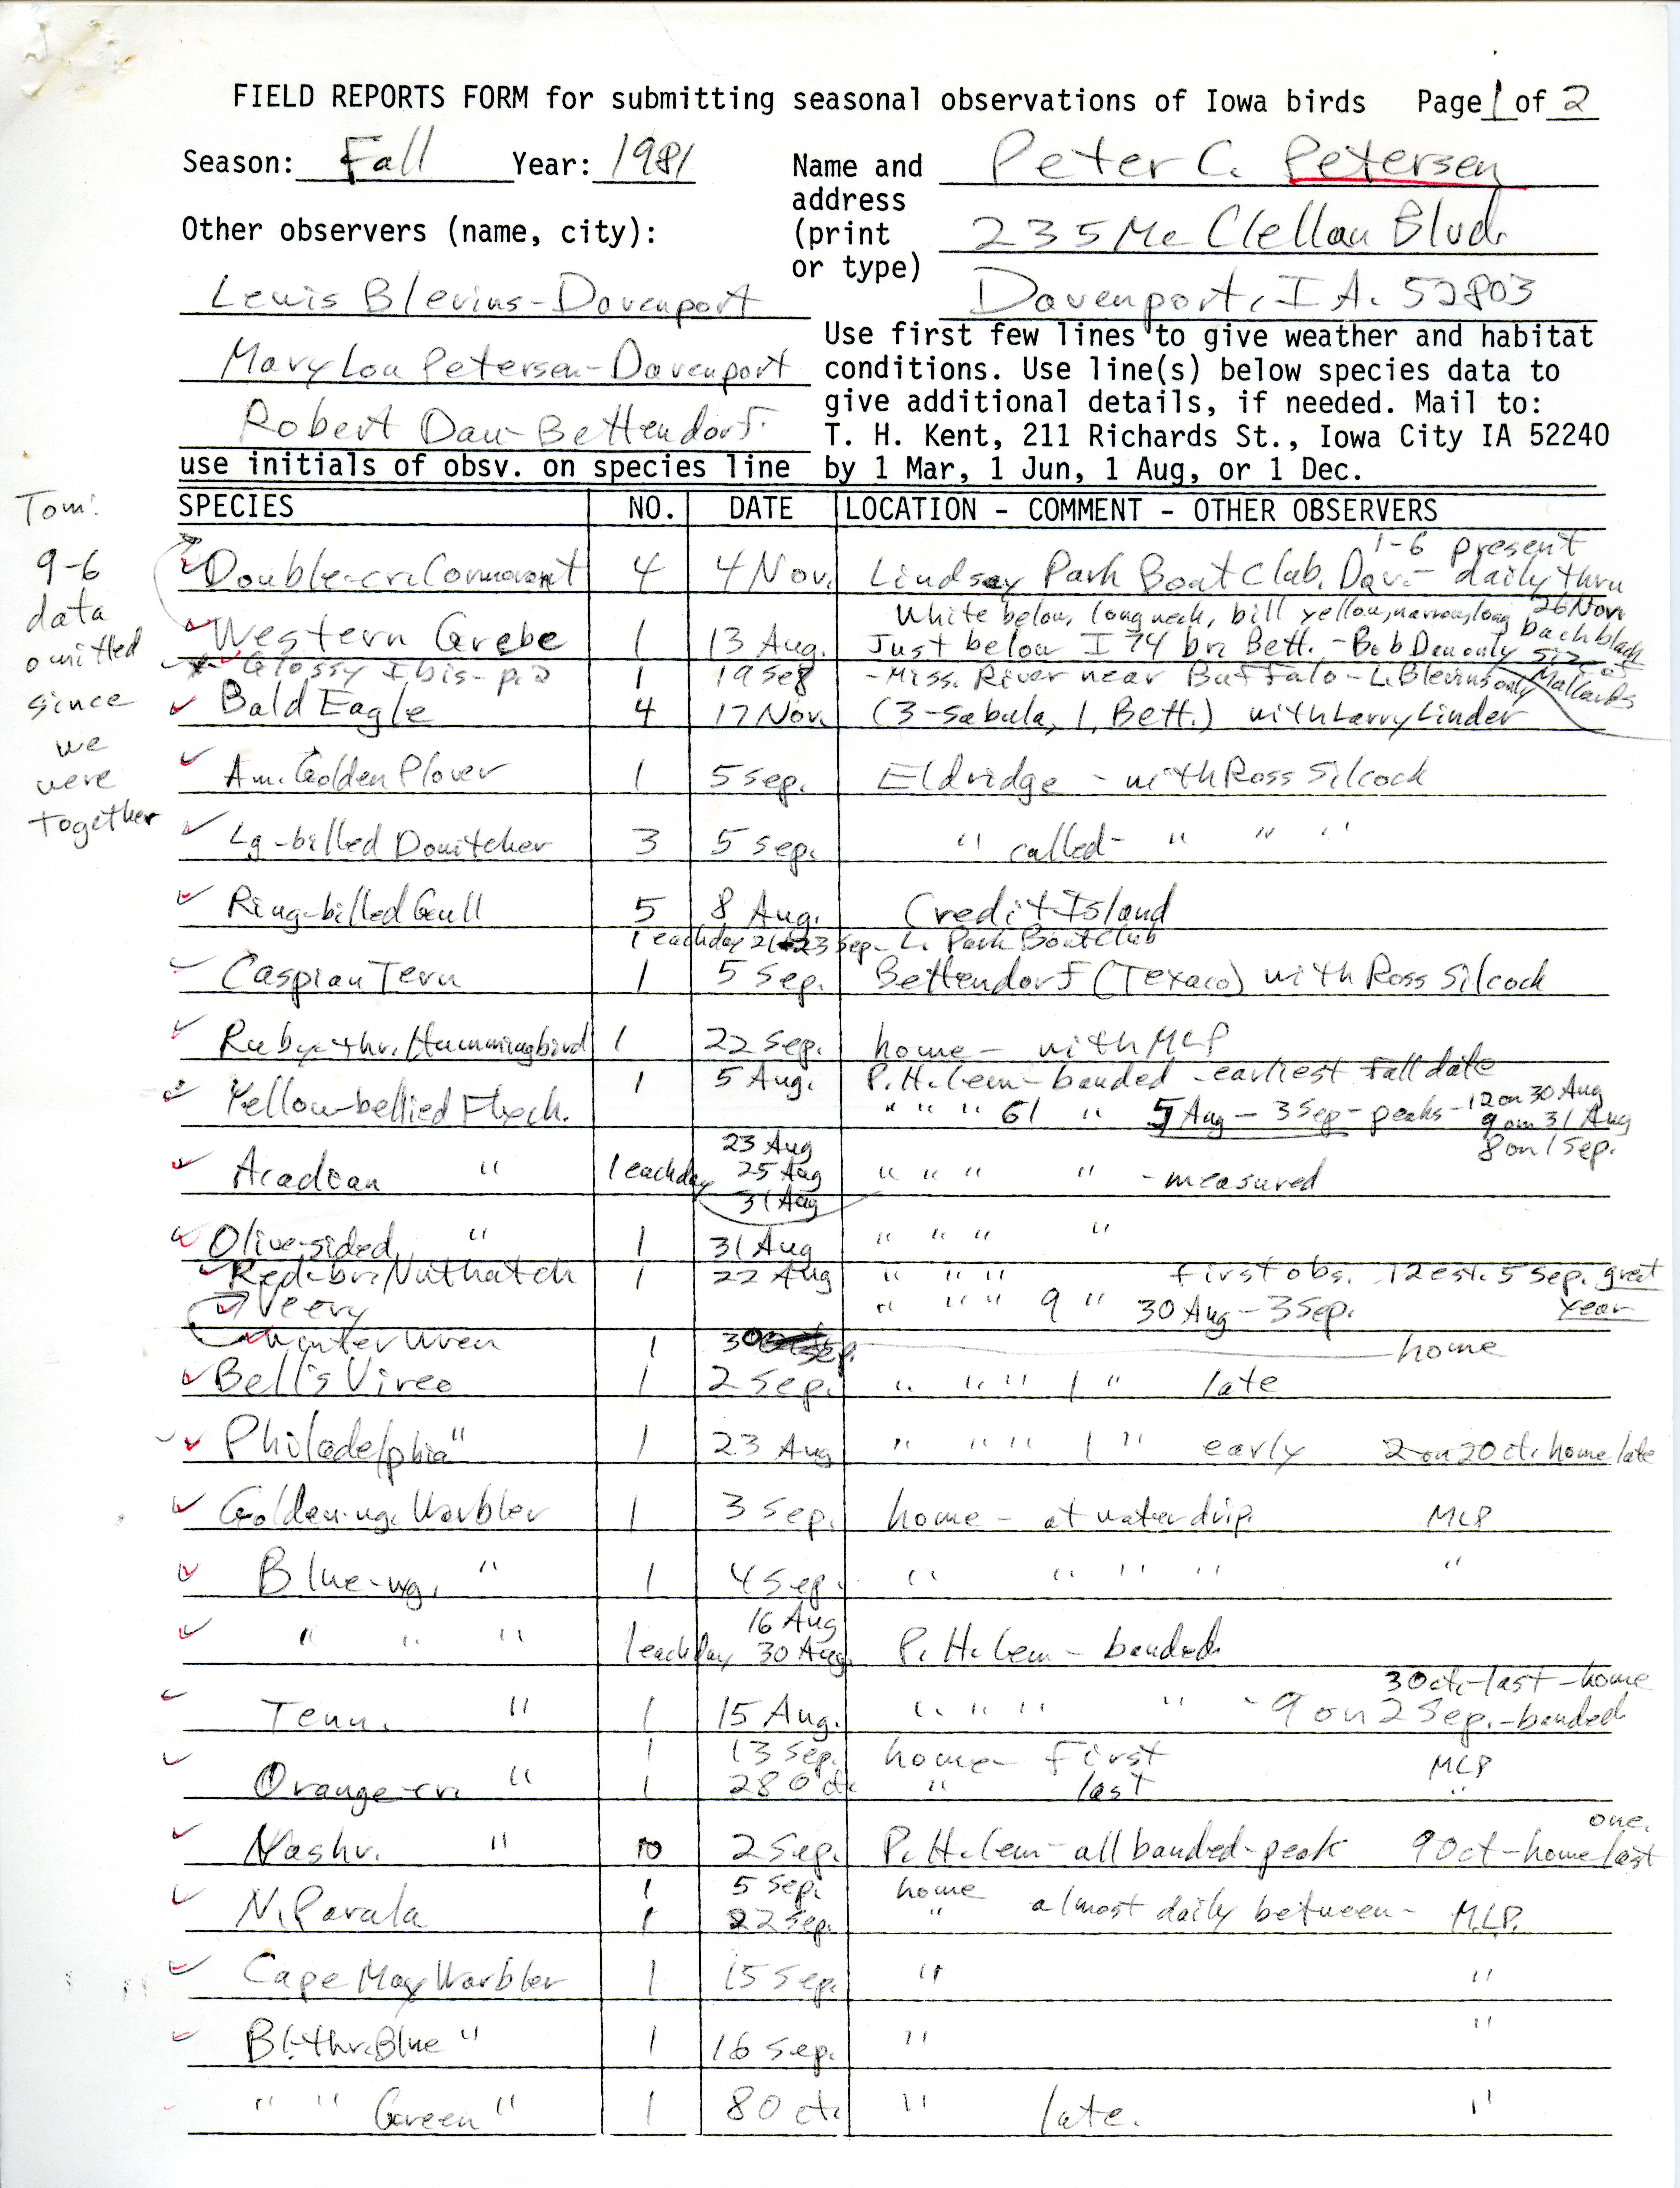 Field notes with additional documentation contributed by Peter C. Petersen, fall 1981